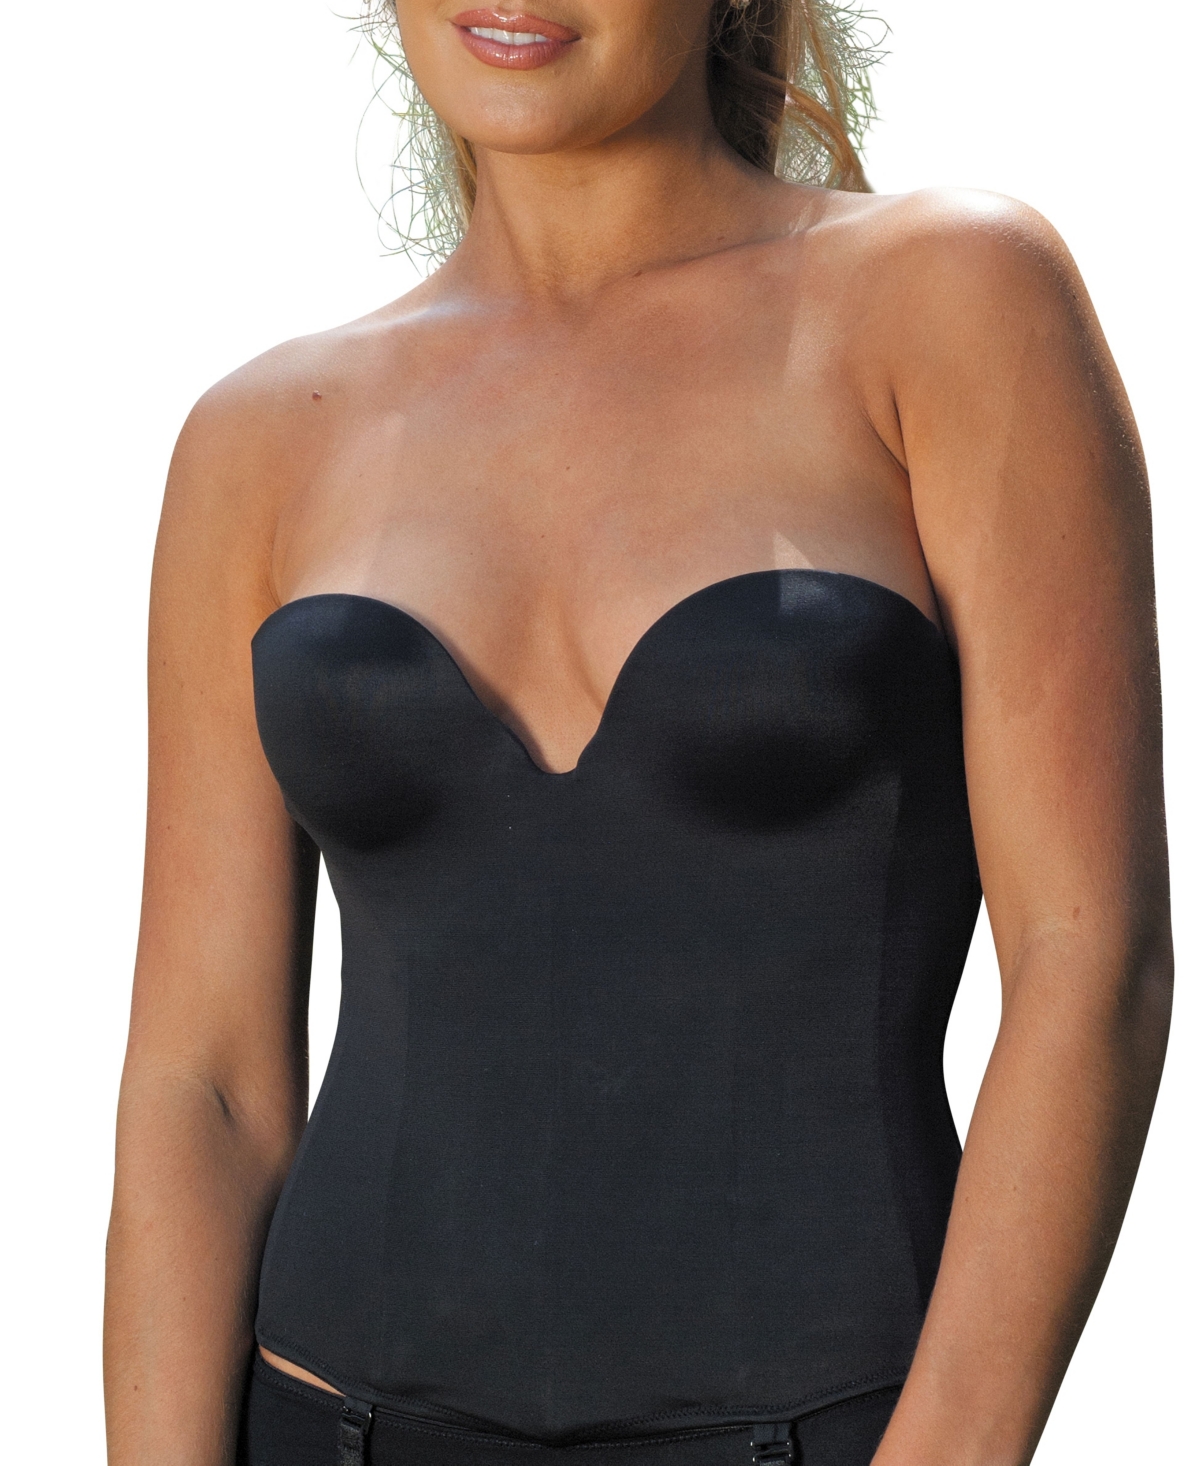 Women's Invisible Strapless Bustier - Nude